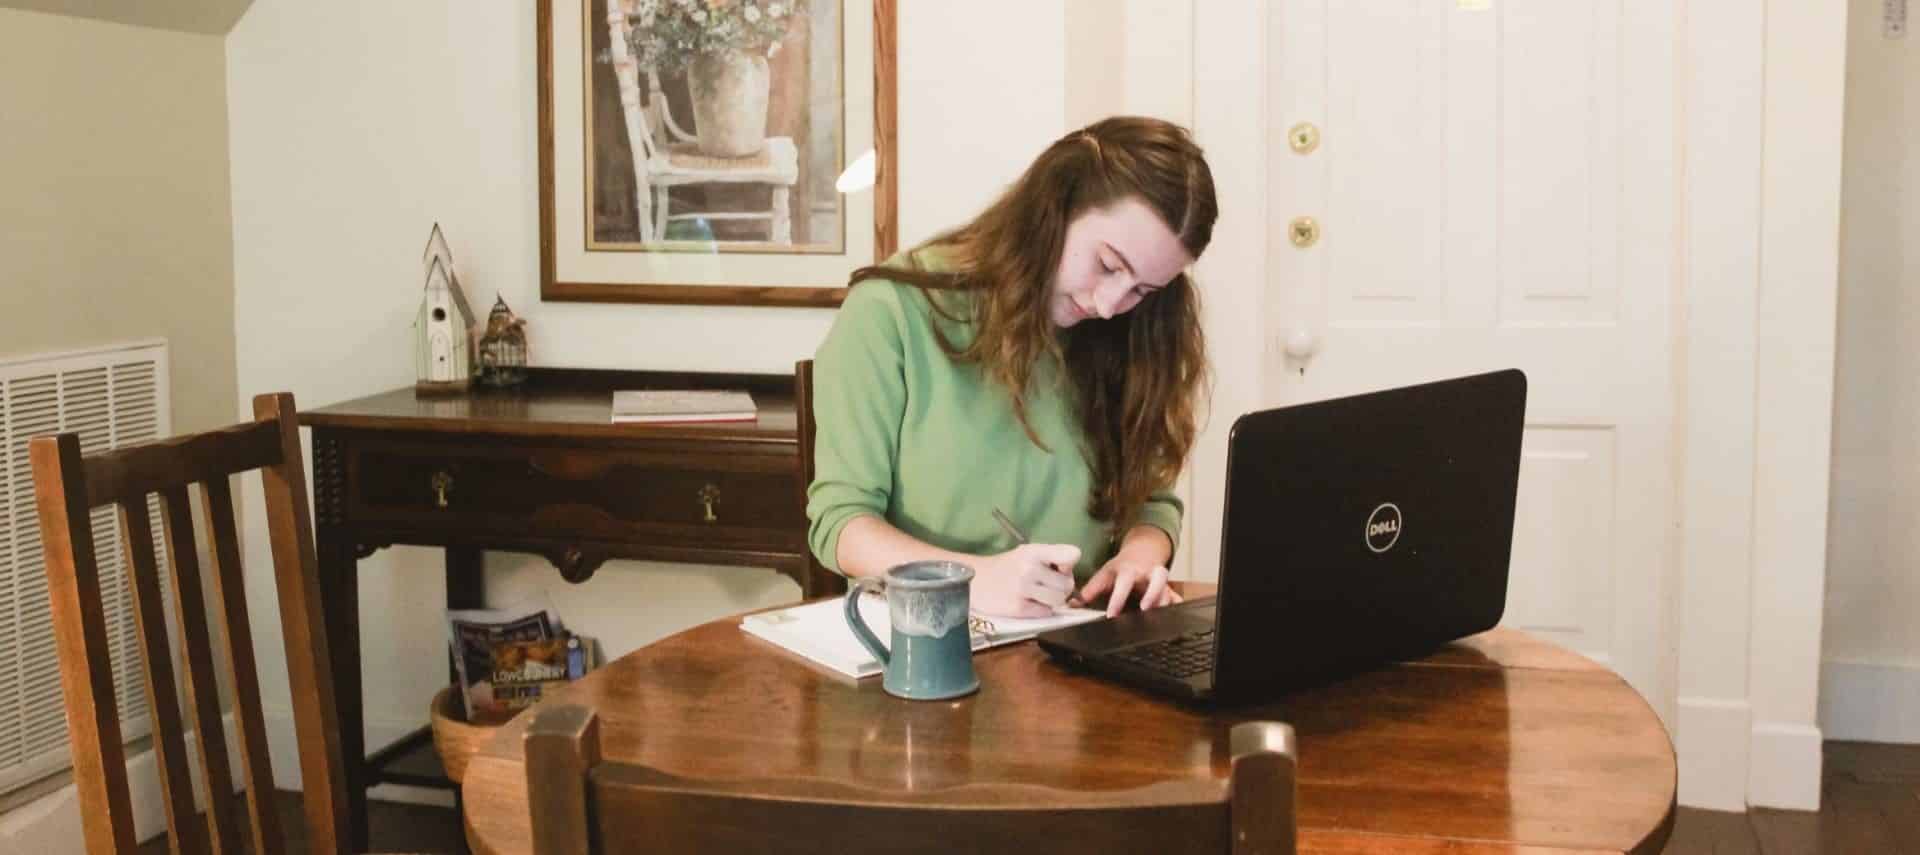 Woman in green shirt sitting at desk writing with laptop near by